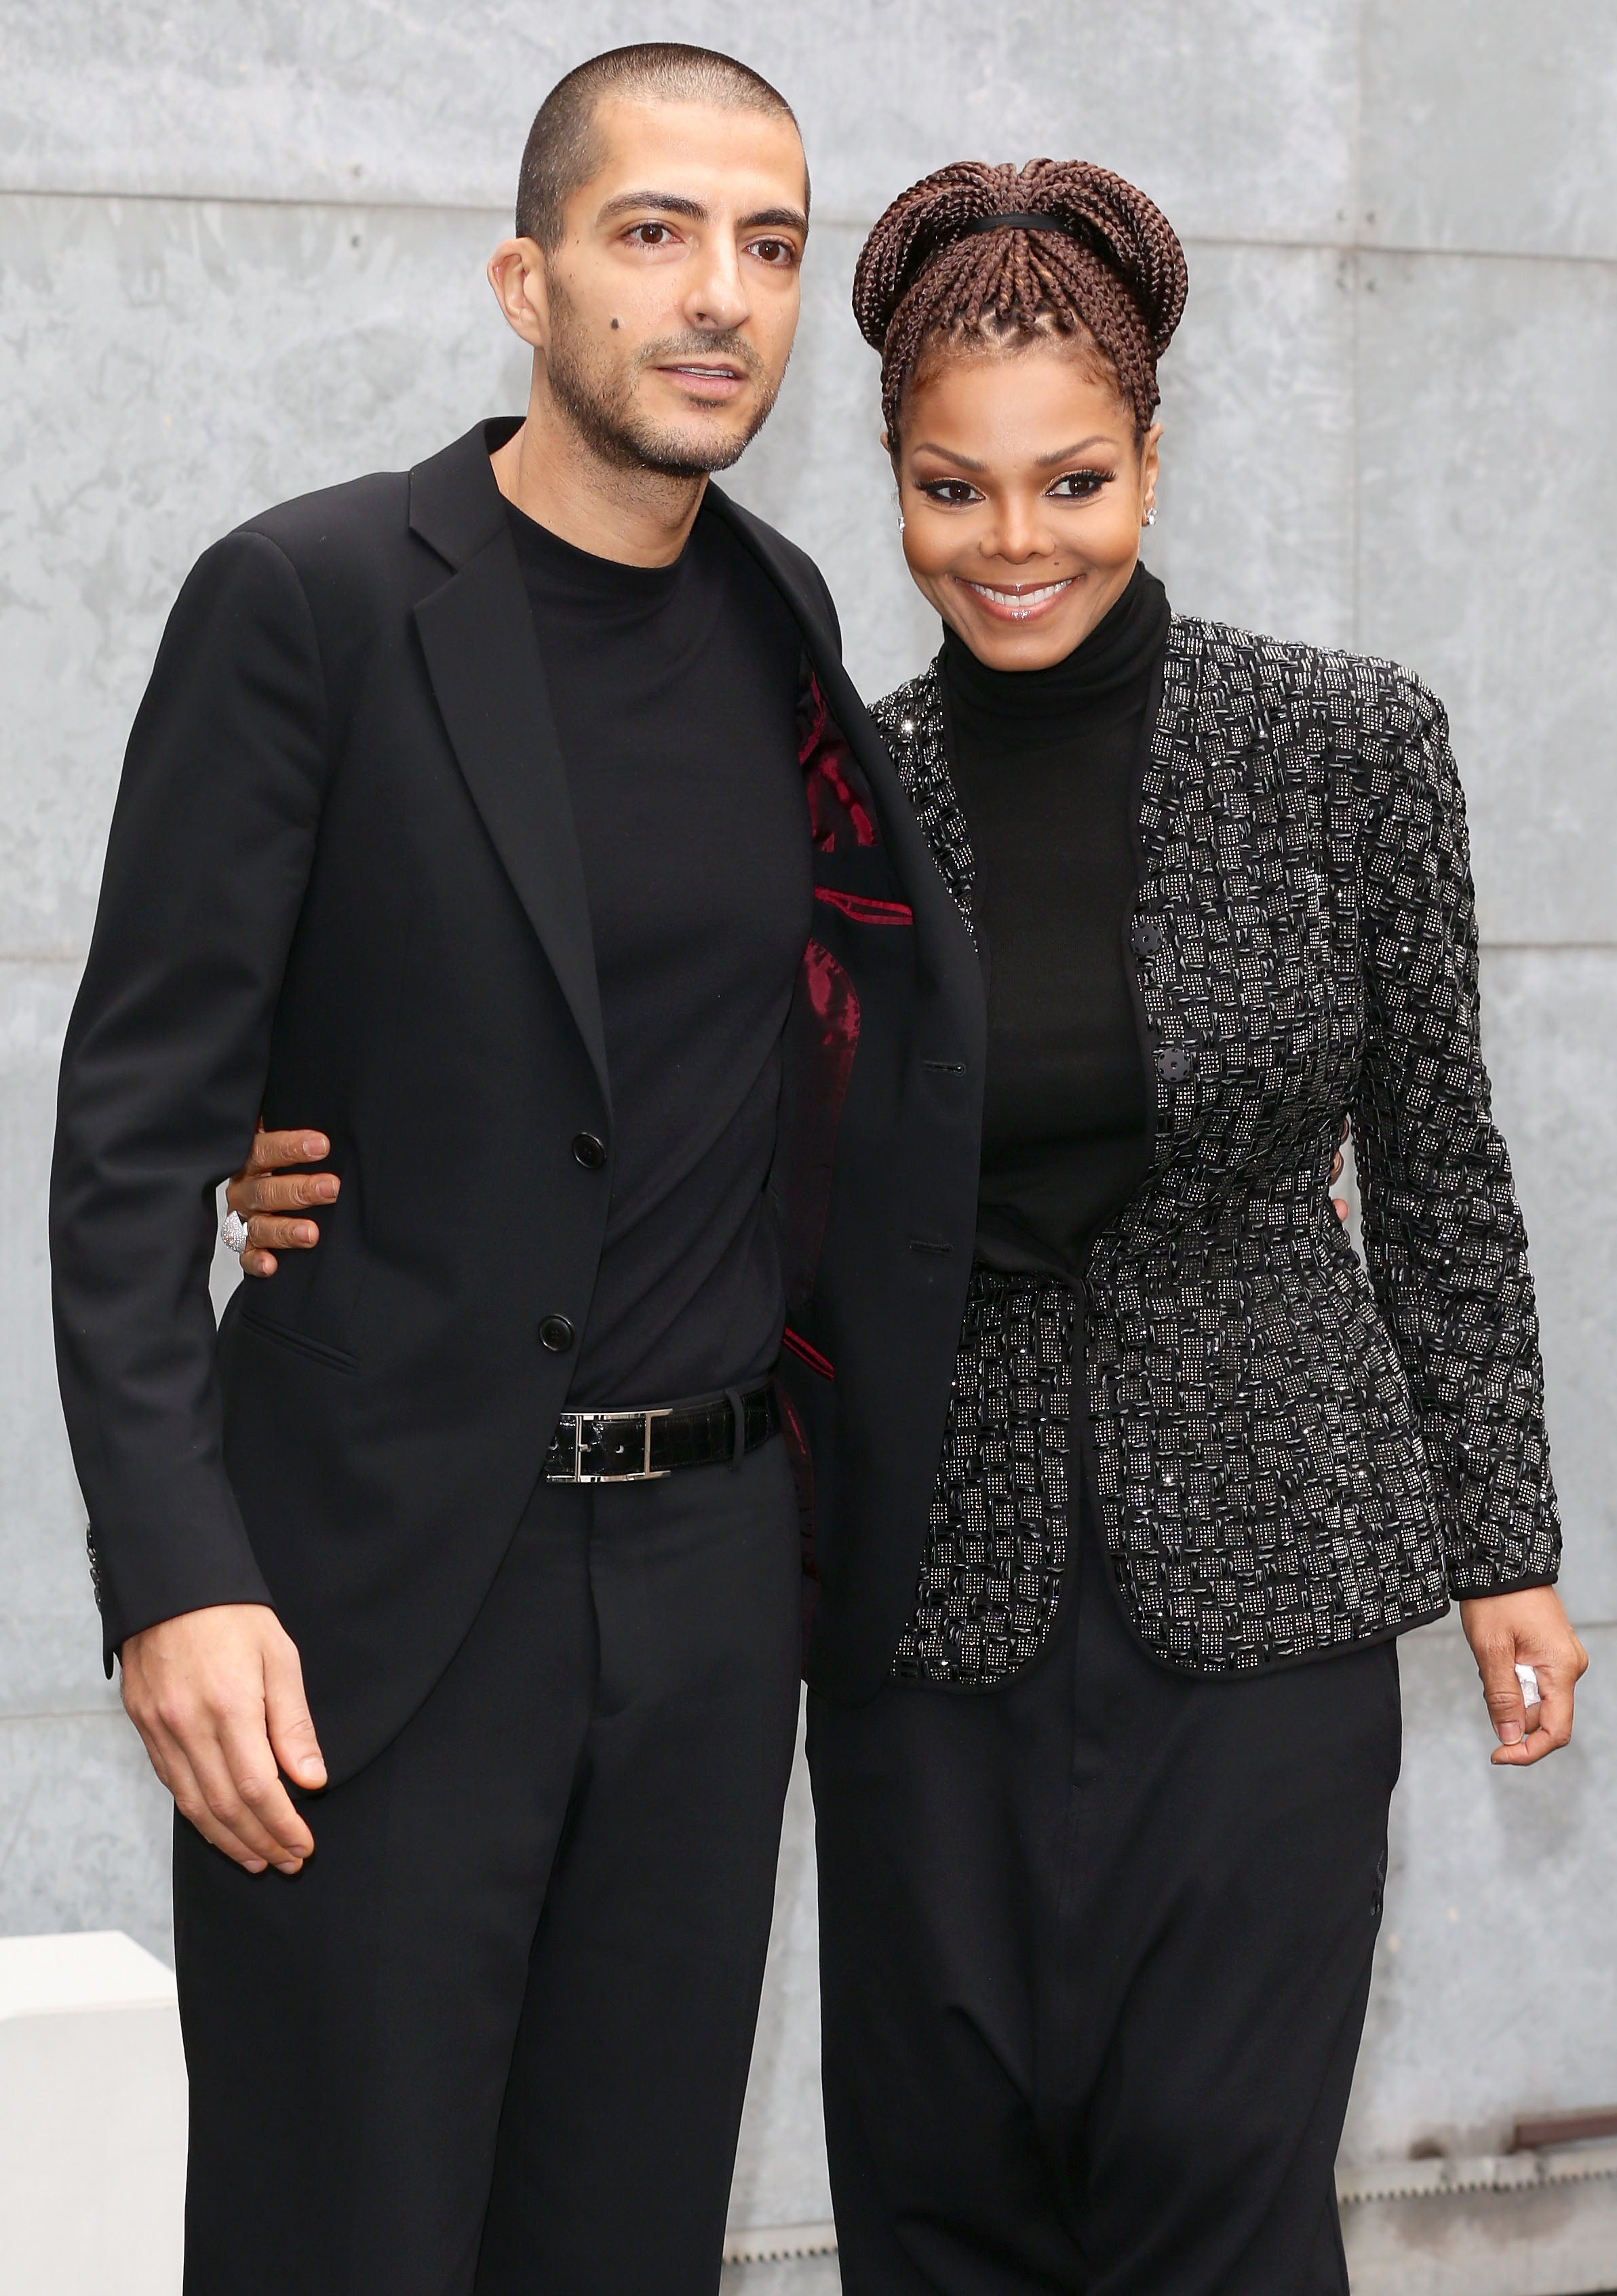 Janet Jackson’s Mother And Sister Meet Baby Eissa For The First Time